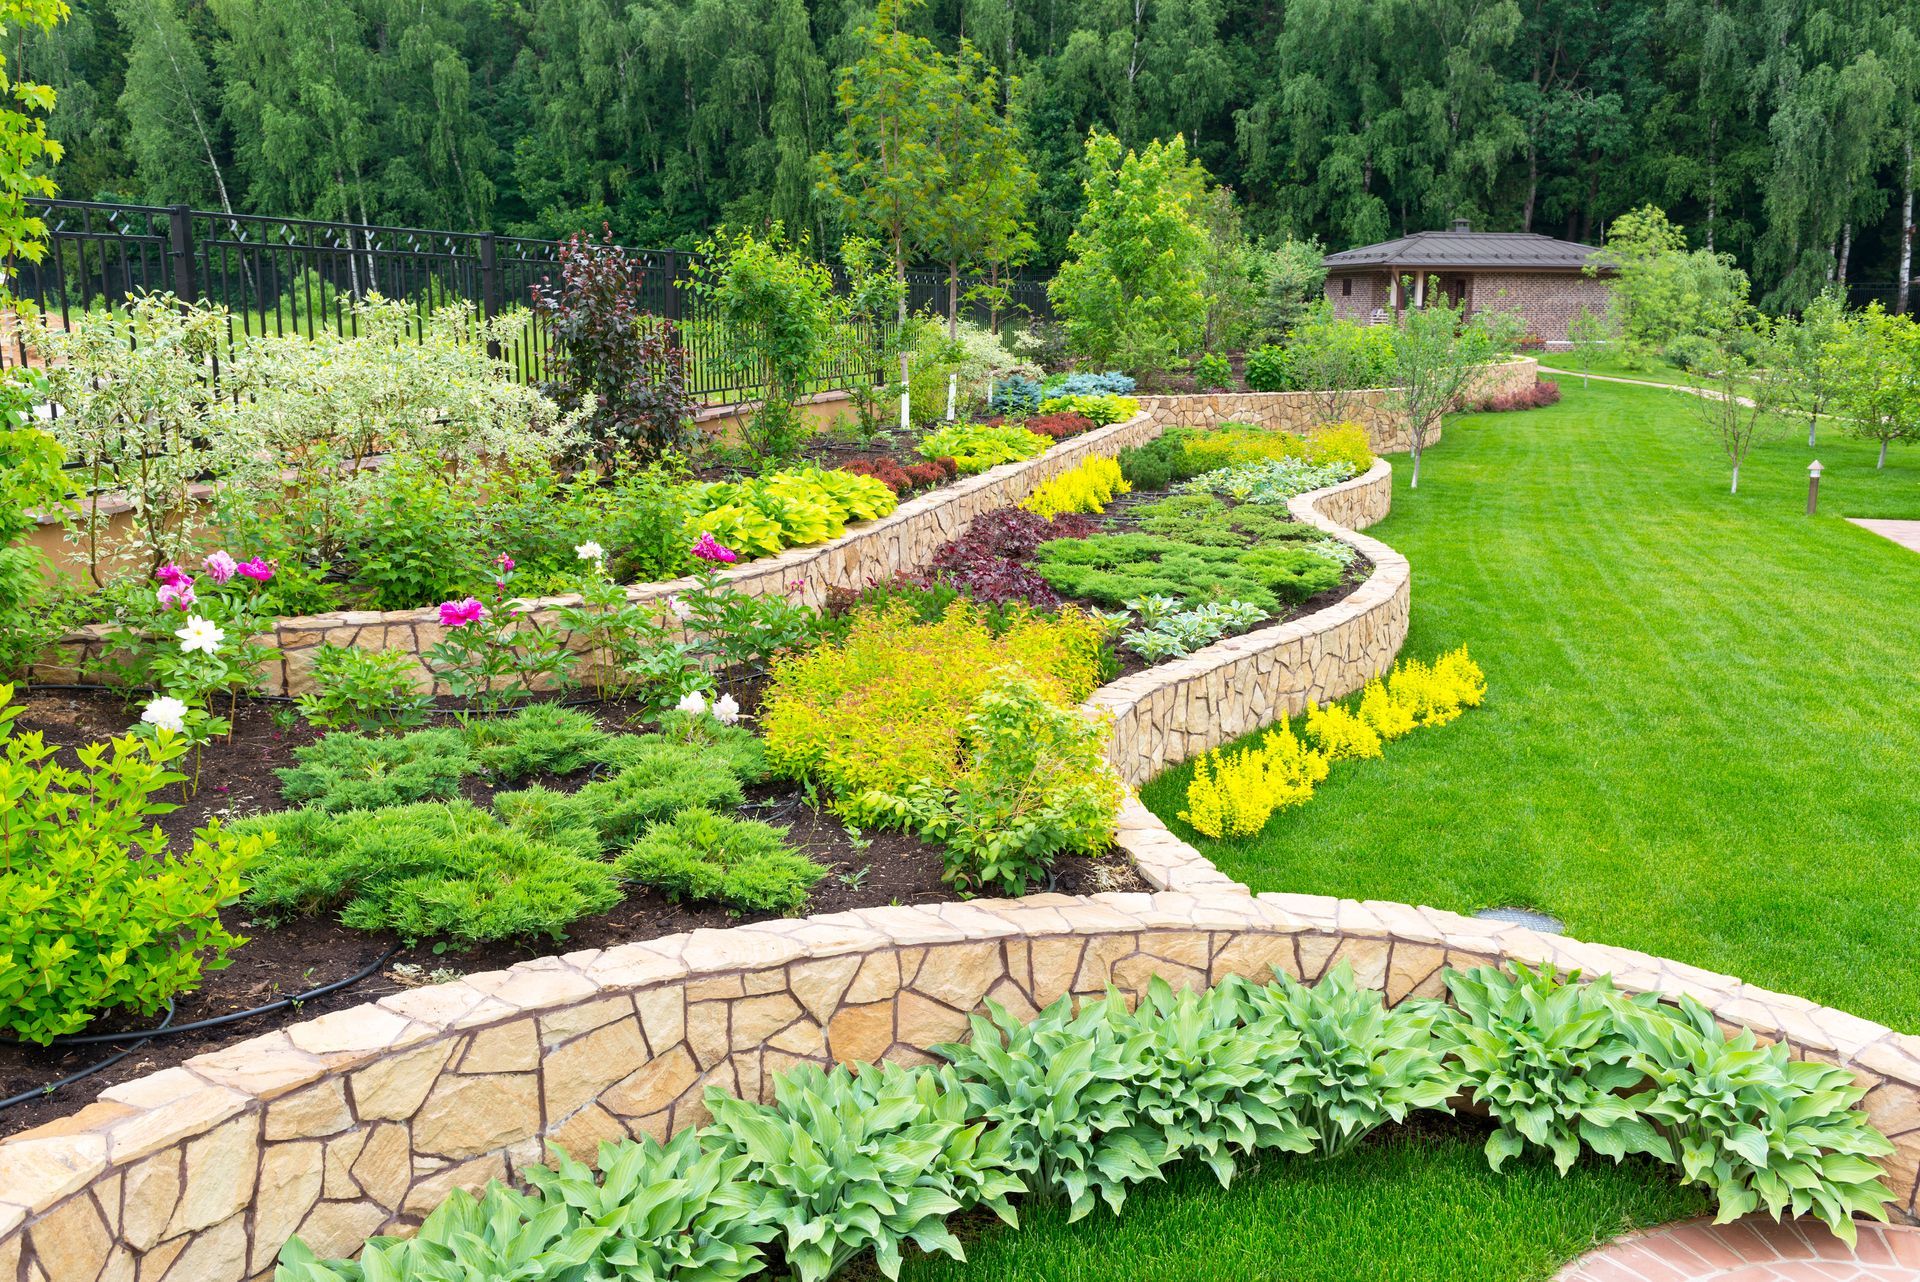 Vibrant and lush garden with a variety of colorful flowers, neatly trimmed hedges.